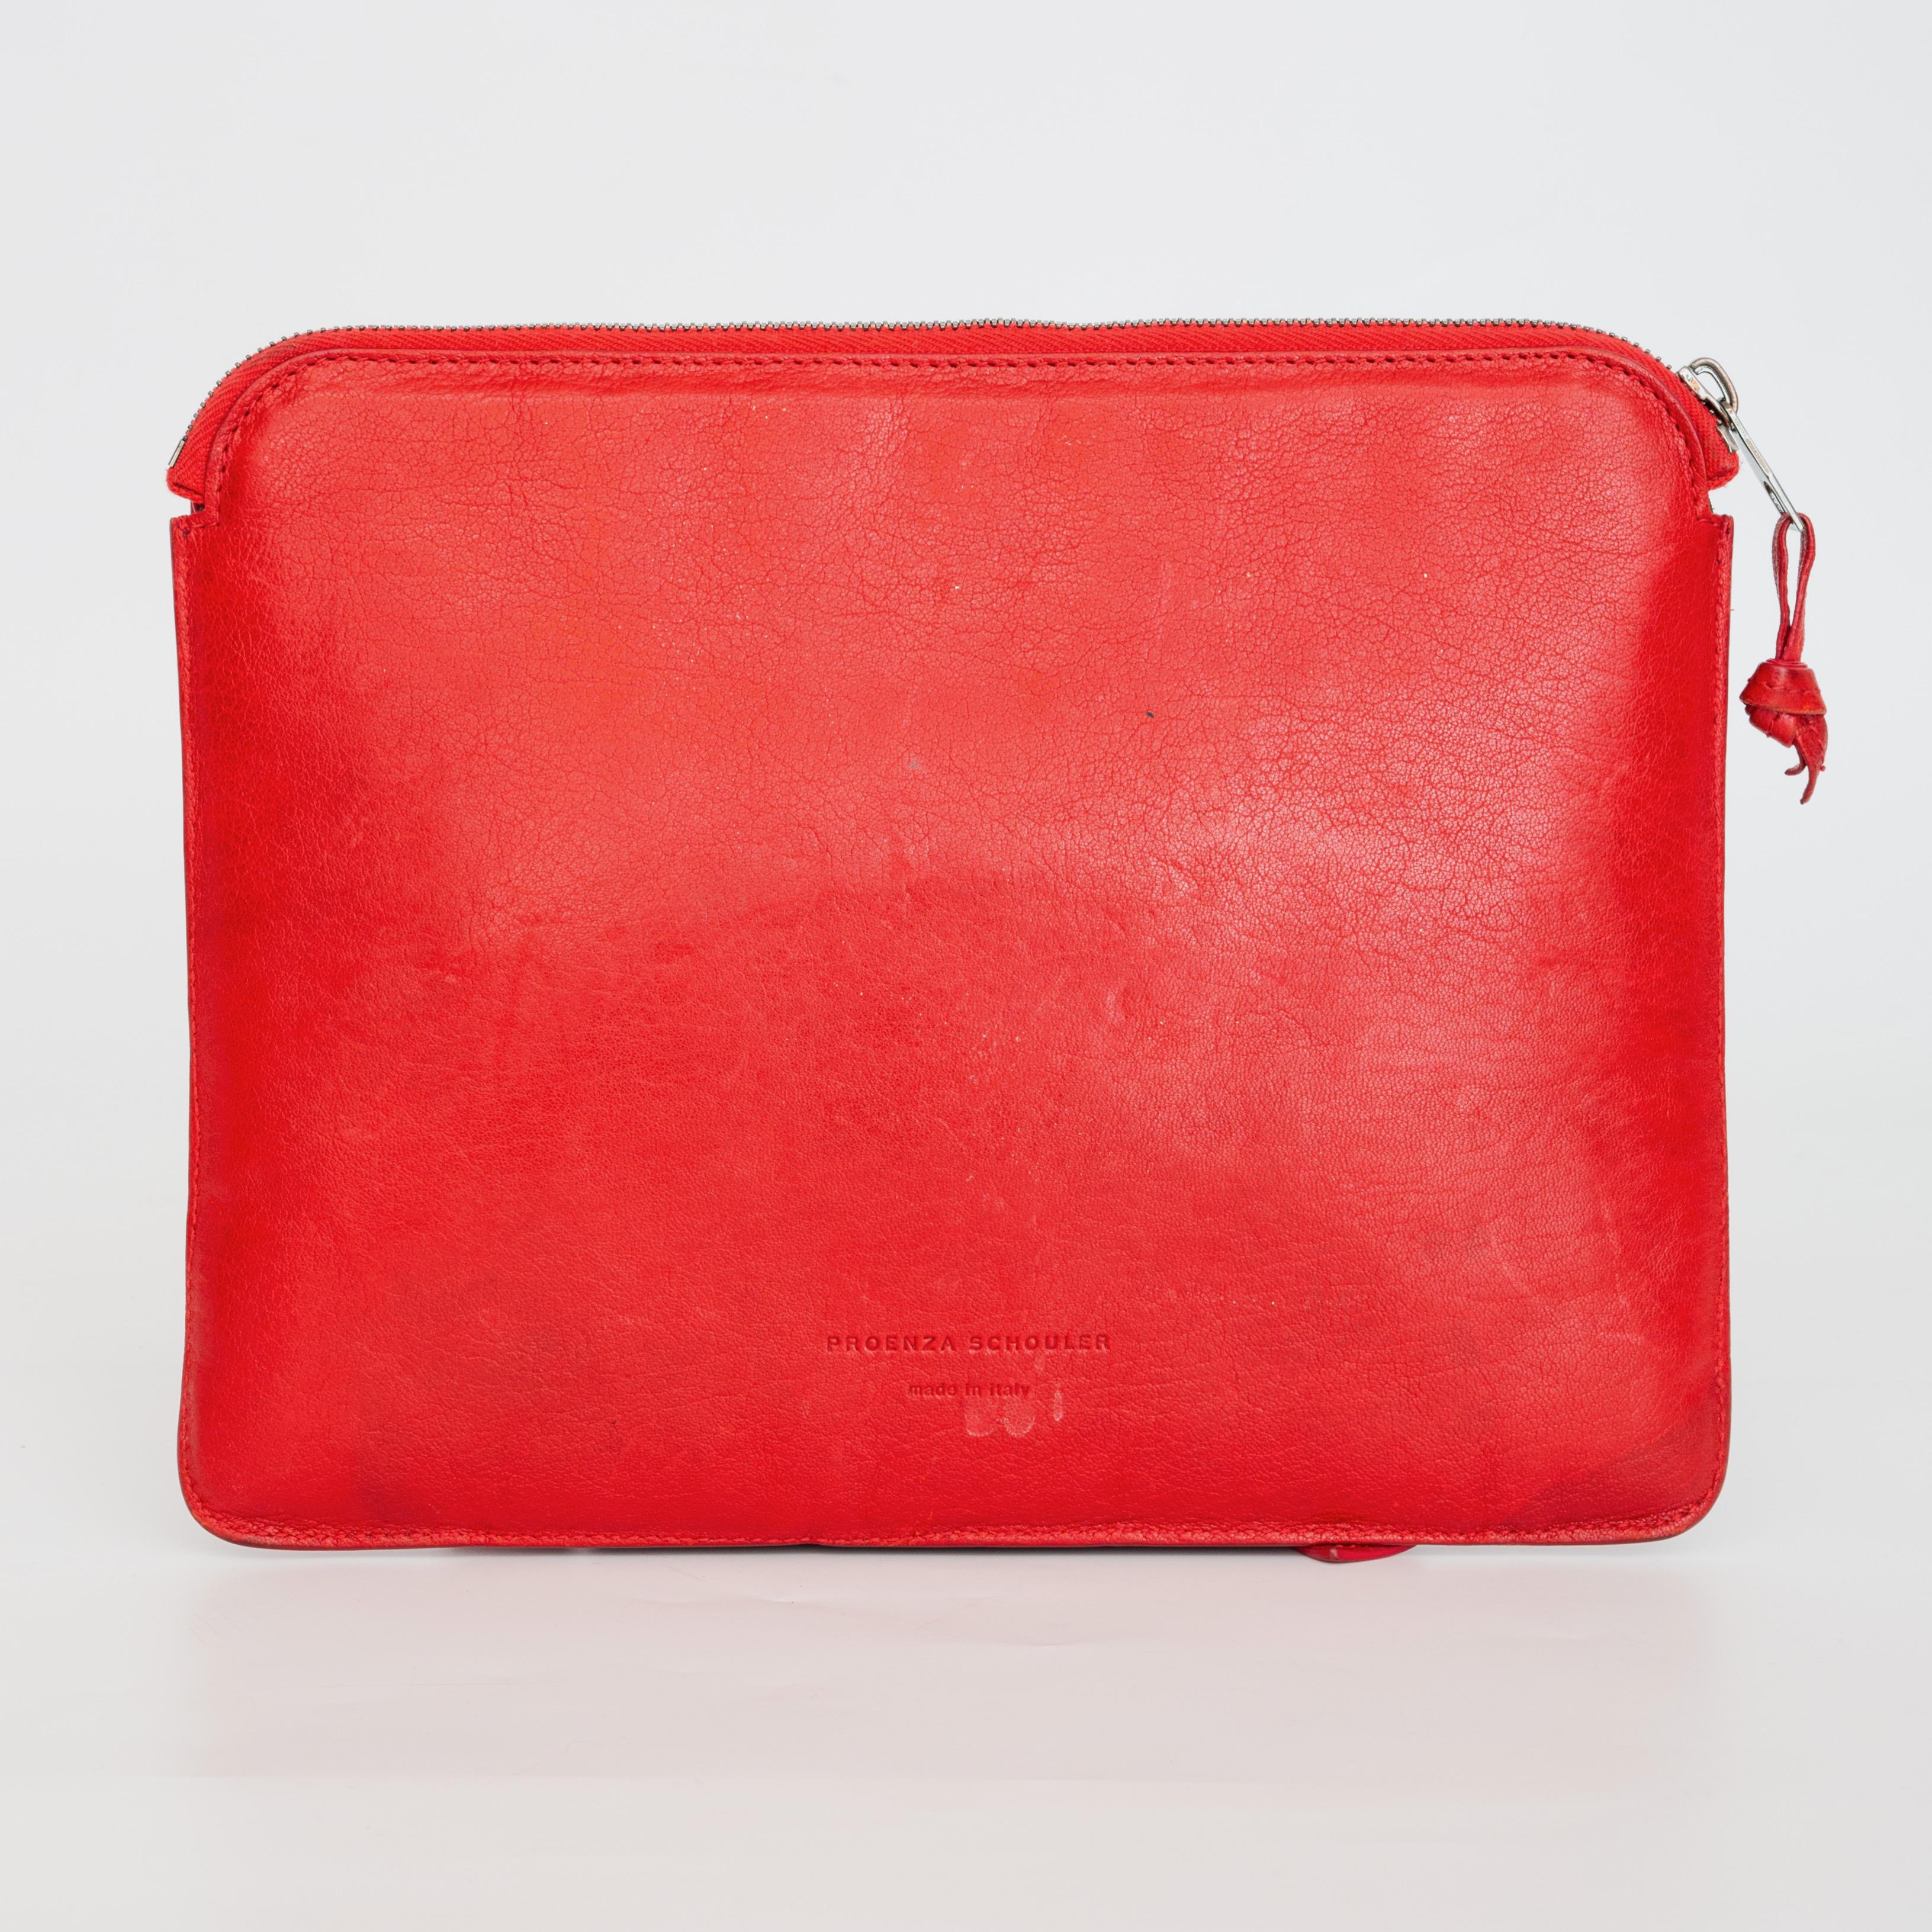 COLOR: Red
MATERIAL: Leather
MEASURES: H 8.5” x L 10.75” x D 0.75” 
COMES WITH: Dust bag
CONDITION: Good - water stains on the bottom and strap, pen mark on the top left. Leather shows signs of wears on corners.